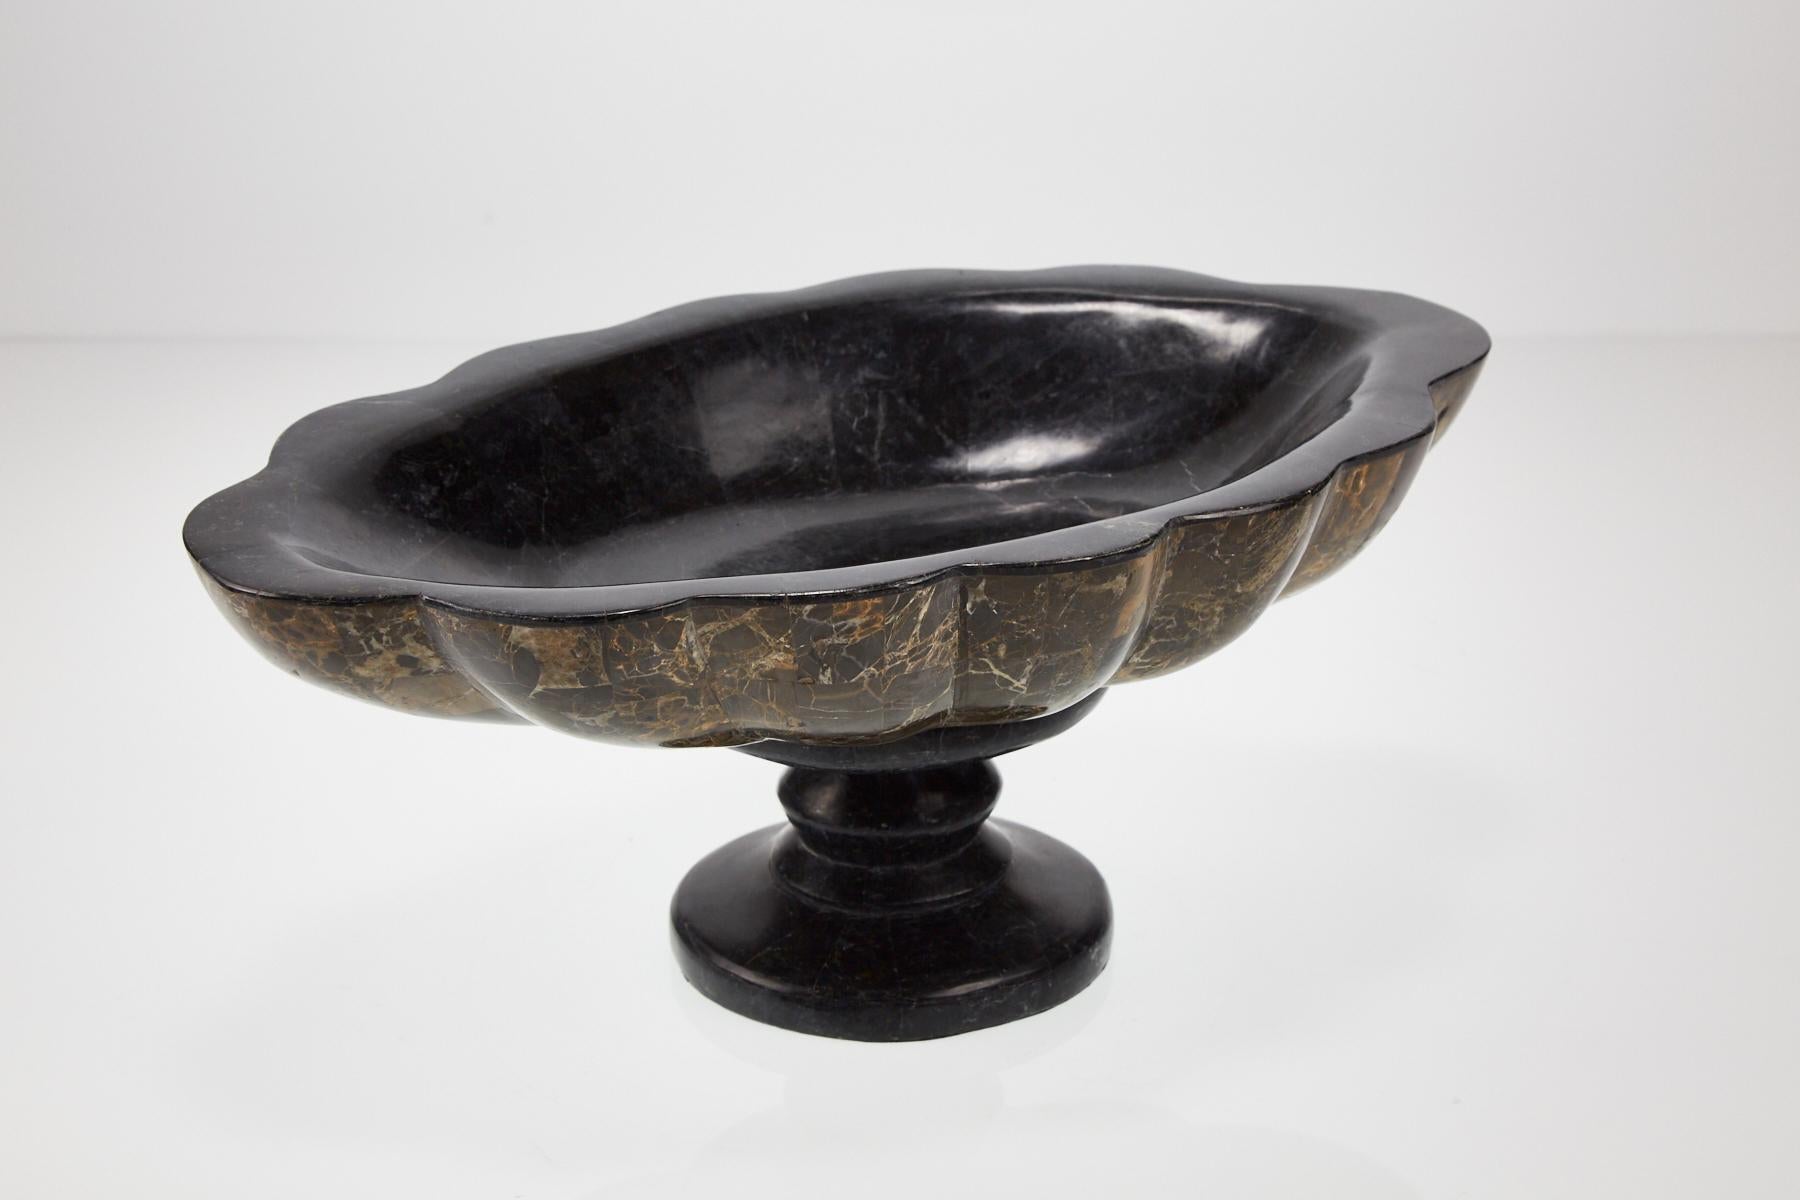 Elegant shell-shaped bowl on footed base. Completely covered in black and snakeskin stone over a fiberglass body.

Hand-inlaid from natural materials in the Philippines.

All furnishings are made from 100% natural Fossil Stone or Seashell inlay,